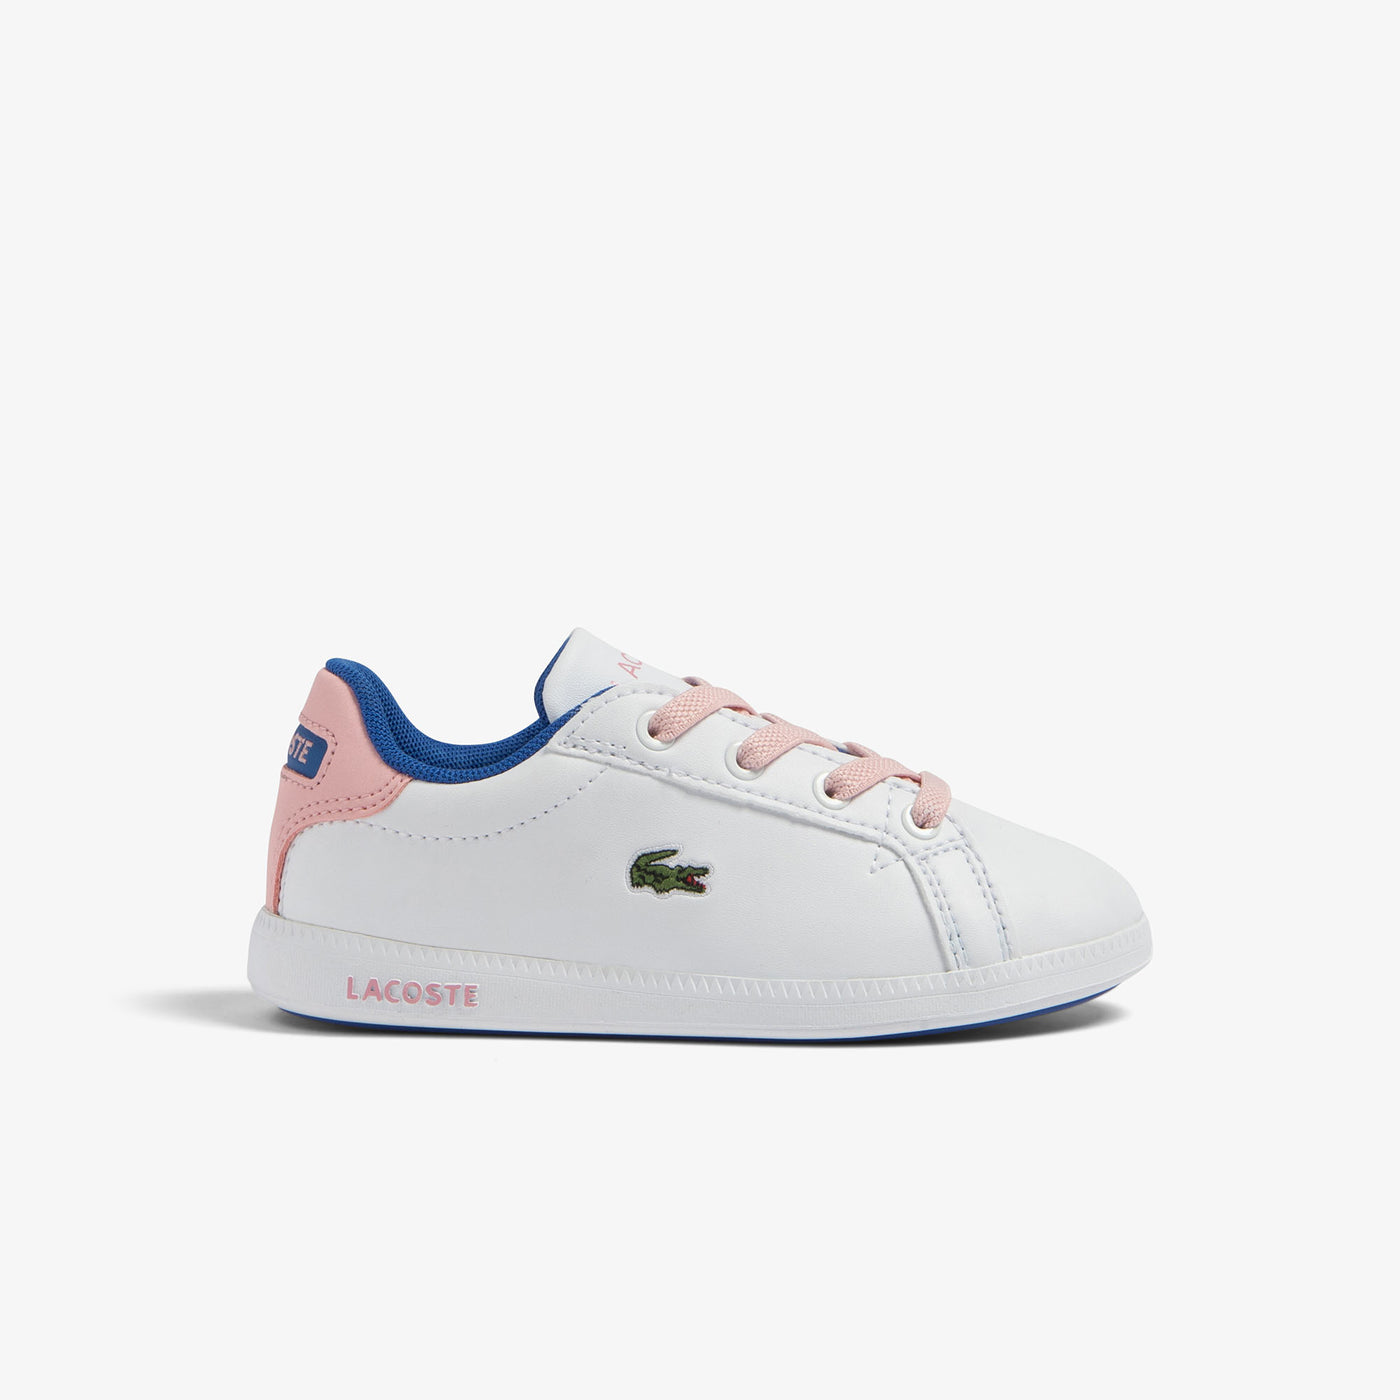 Shop The Latest Collection Of Lacoste Infants' Lacoste Graduate Synthetic Trainers - 45Sui00051Y9 In Lebanon